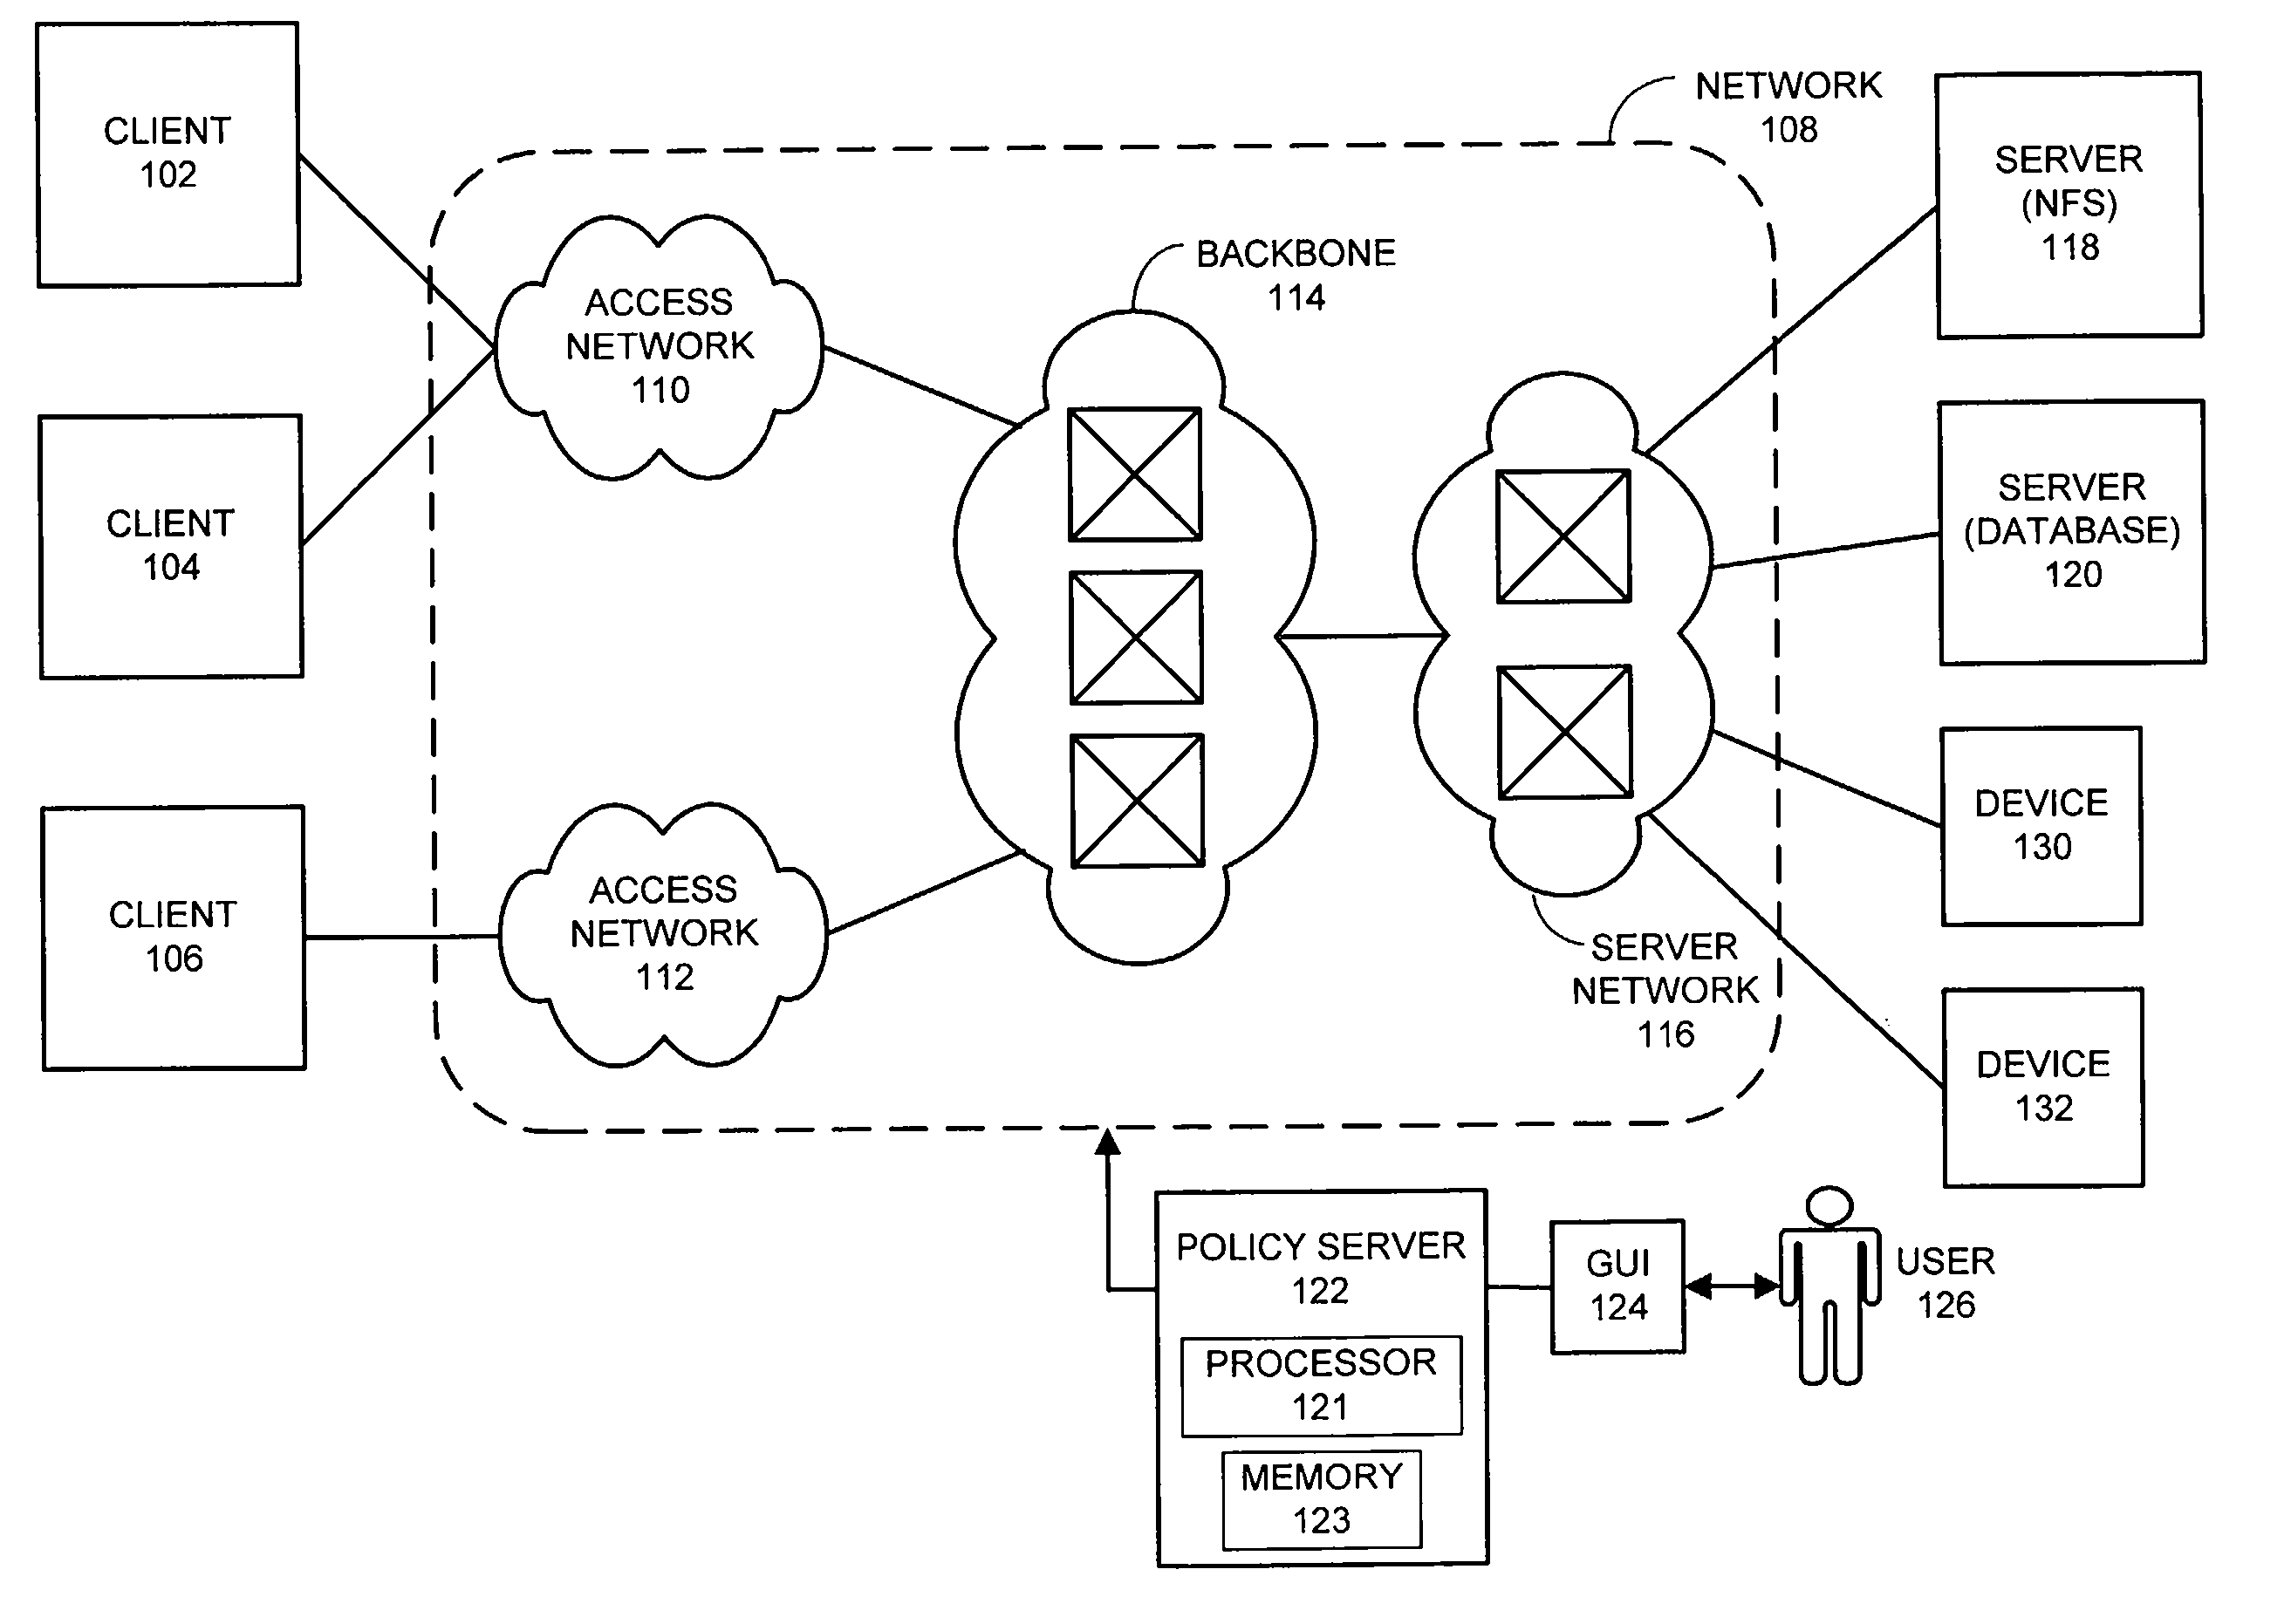 Database for executing policies for controlling devices on a network